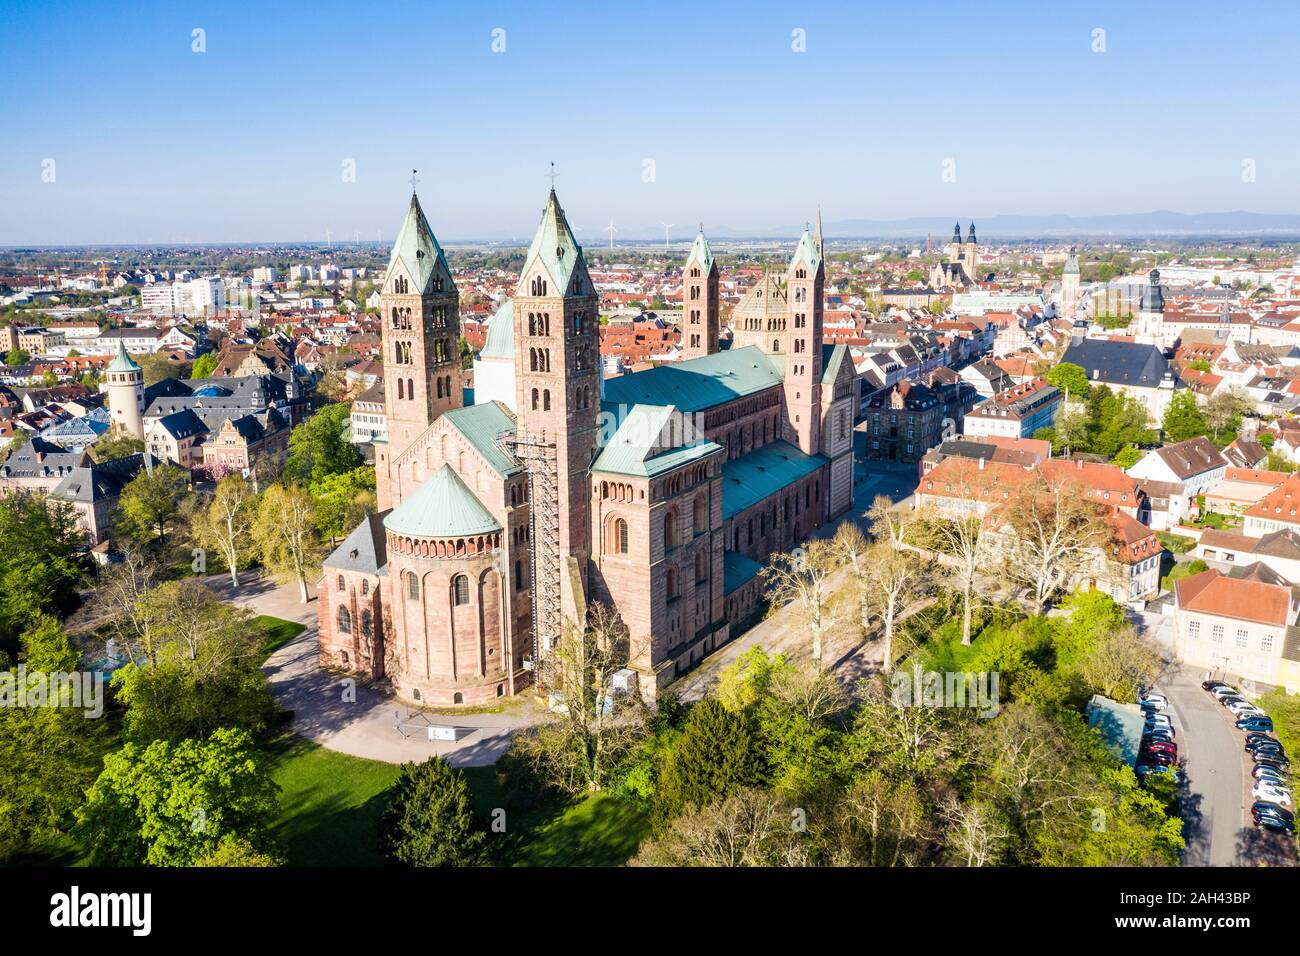 Germany, Speyer, Aerial view of Speyer Cathedral Stock Photo